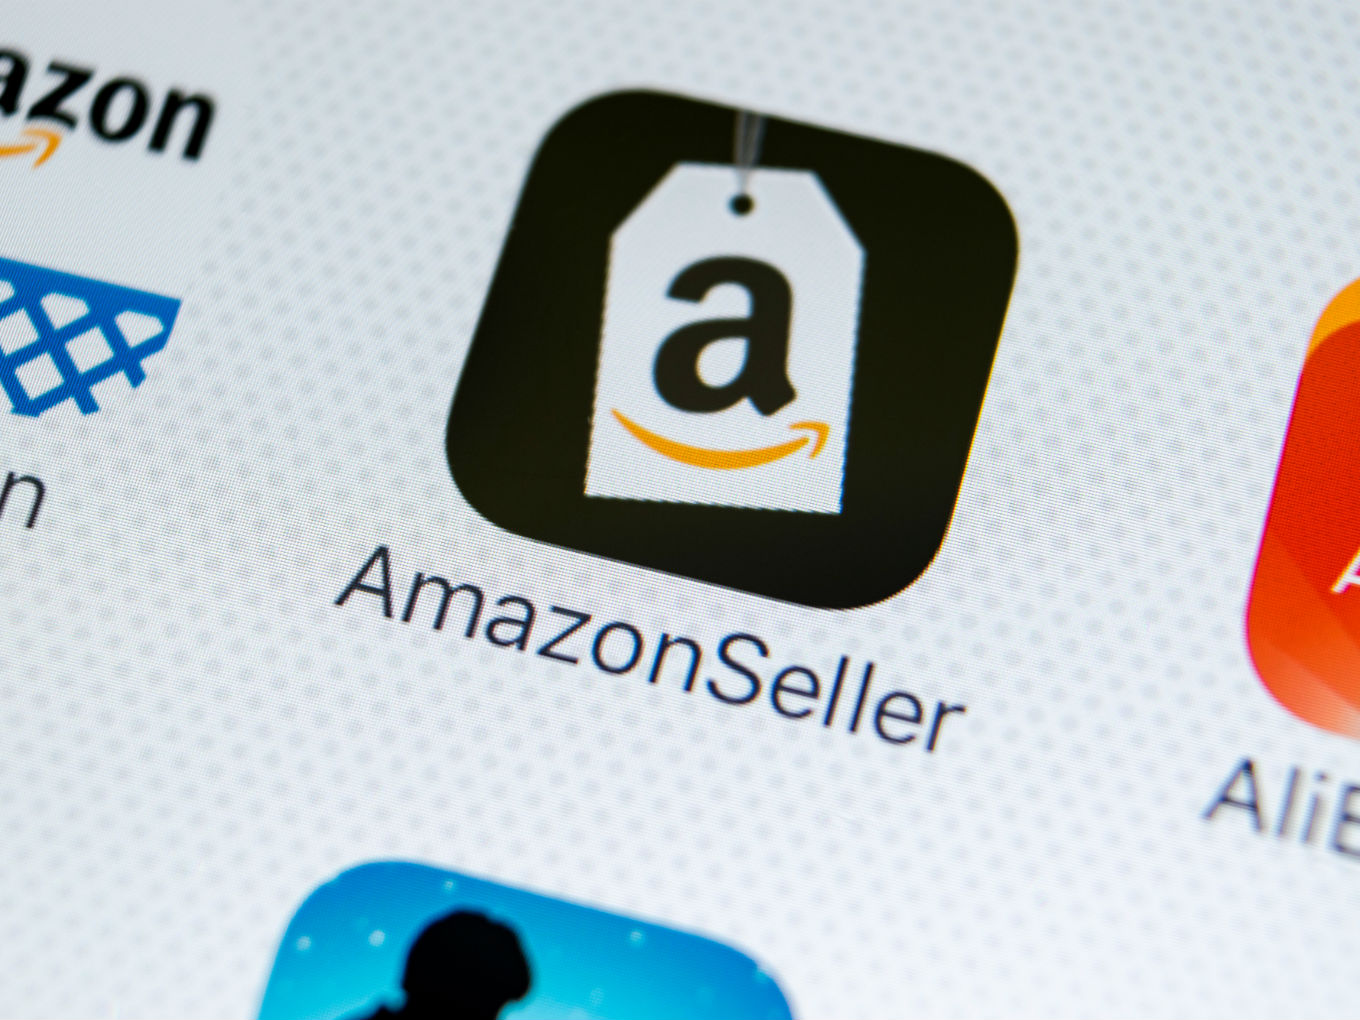 FDI Ecommerce Rule: Amazon Reduces Stake In Seller Companies, CAIT Cries Foul